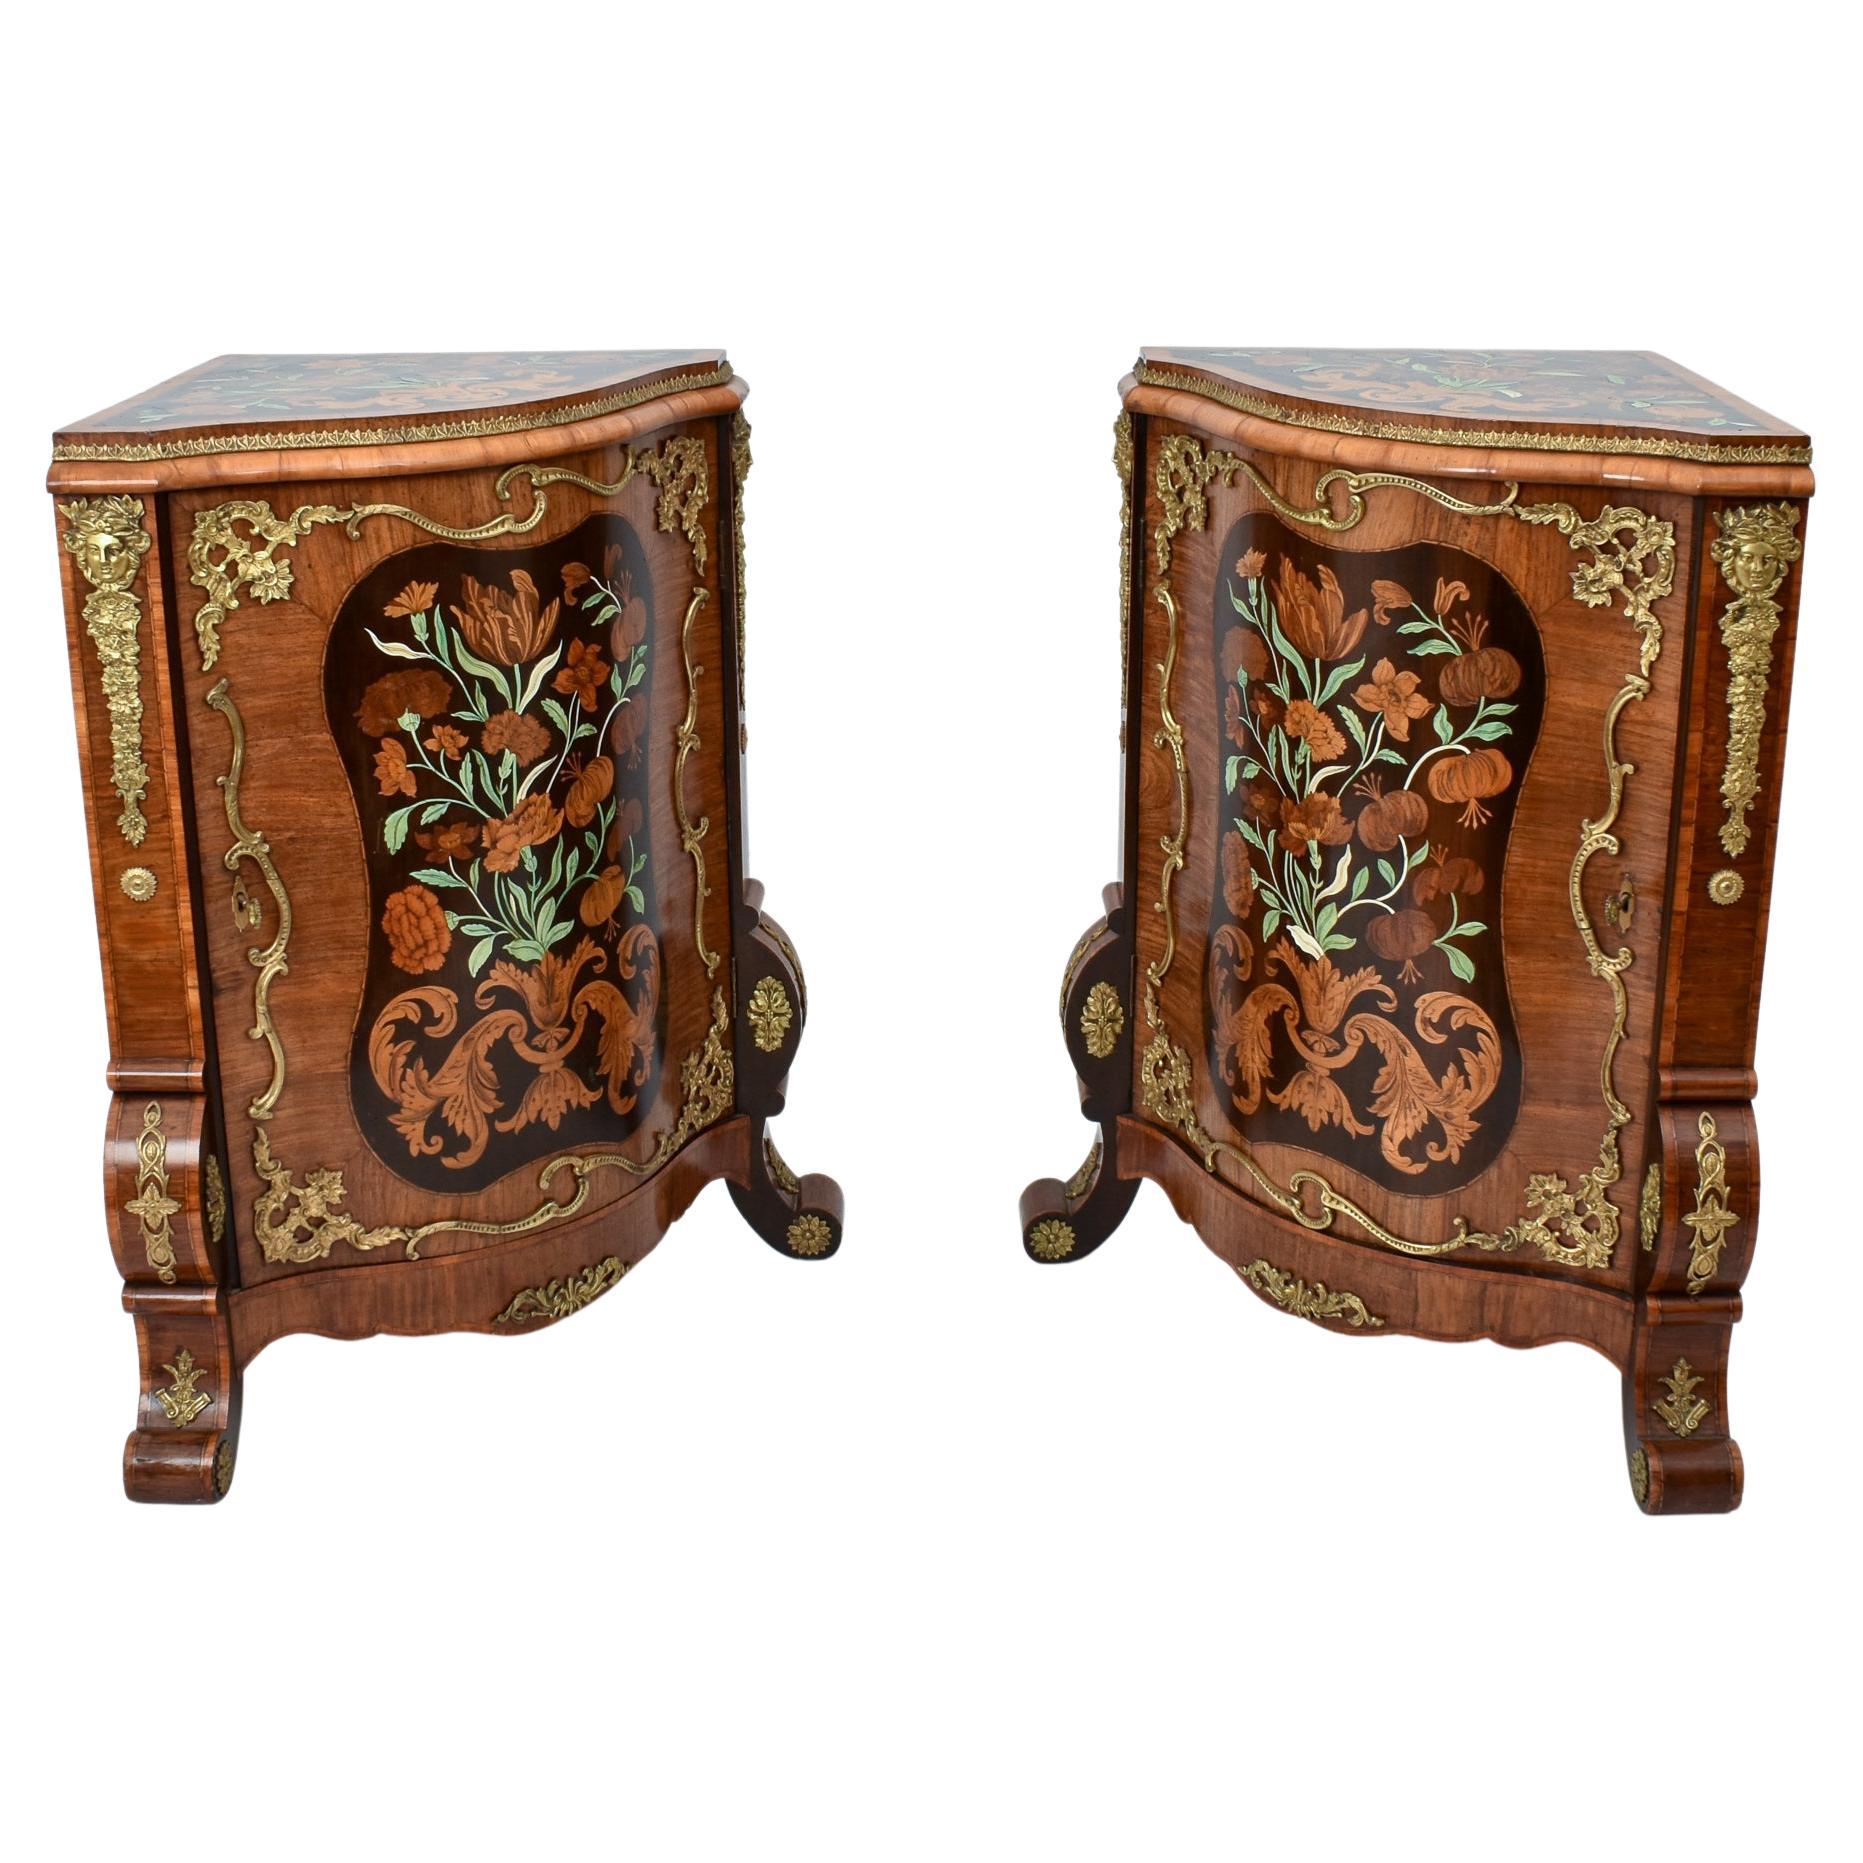 Extremely Rare Marquetry Corner Cabinets, Ormalu Mount, circa 1880 For Sale